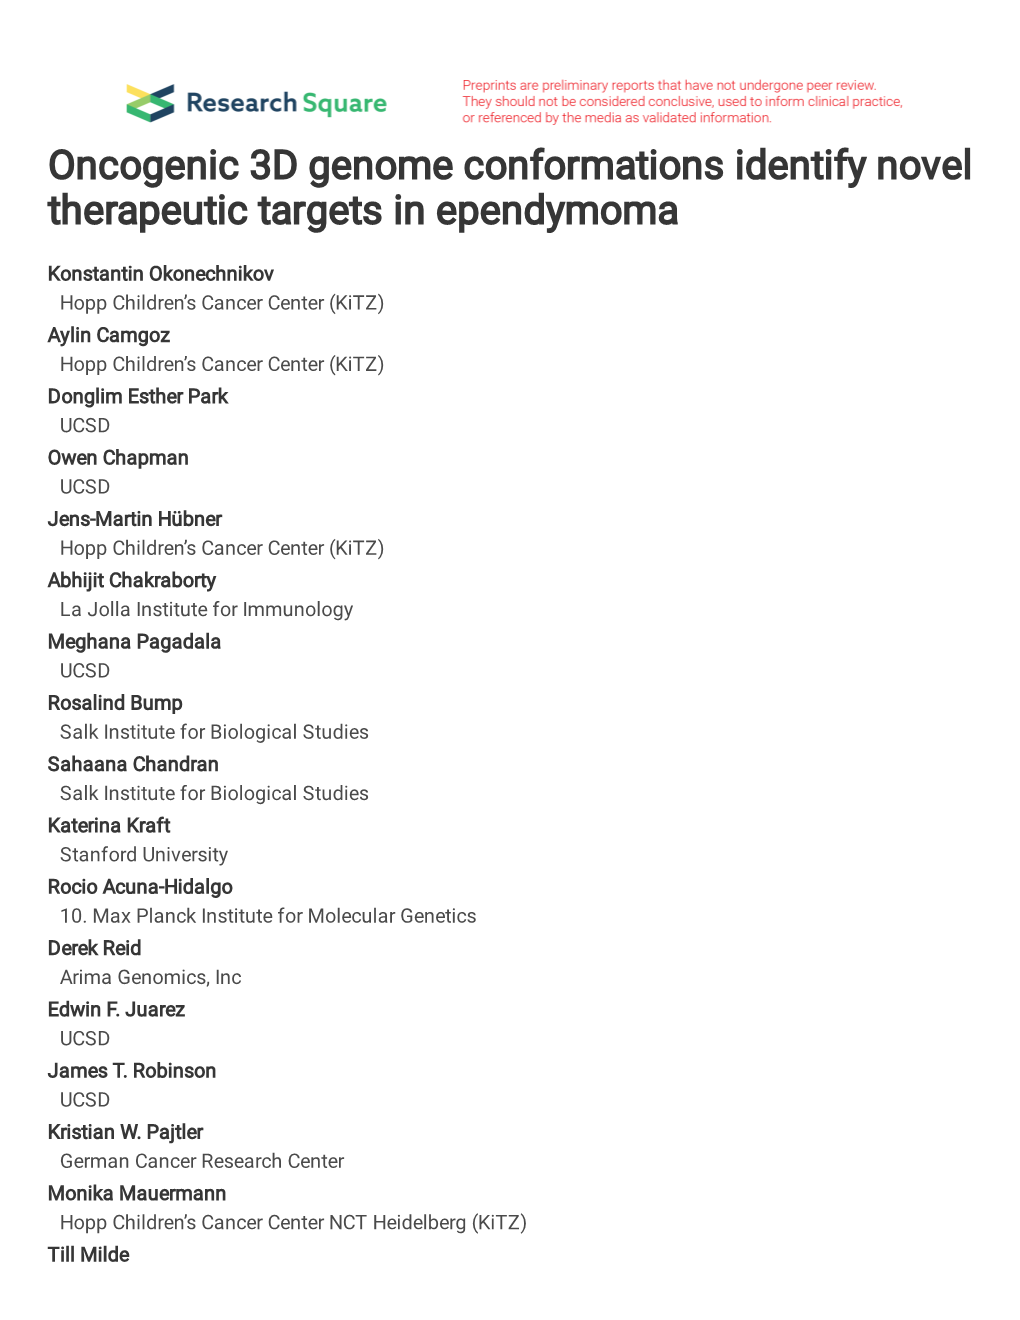 Oncogenic 3D Genome Conformations Identify Novel Therapeutic Targets in Ependymoma